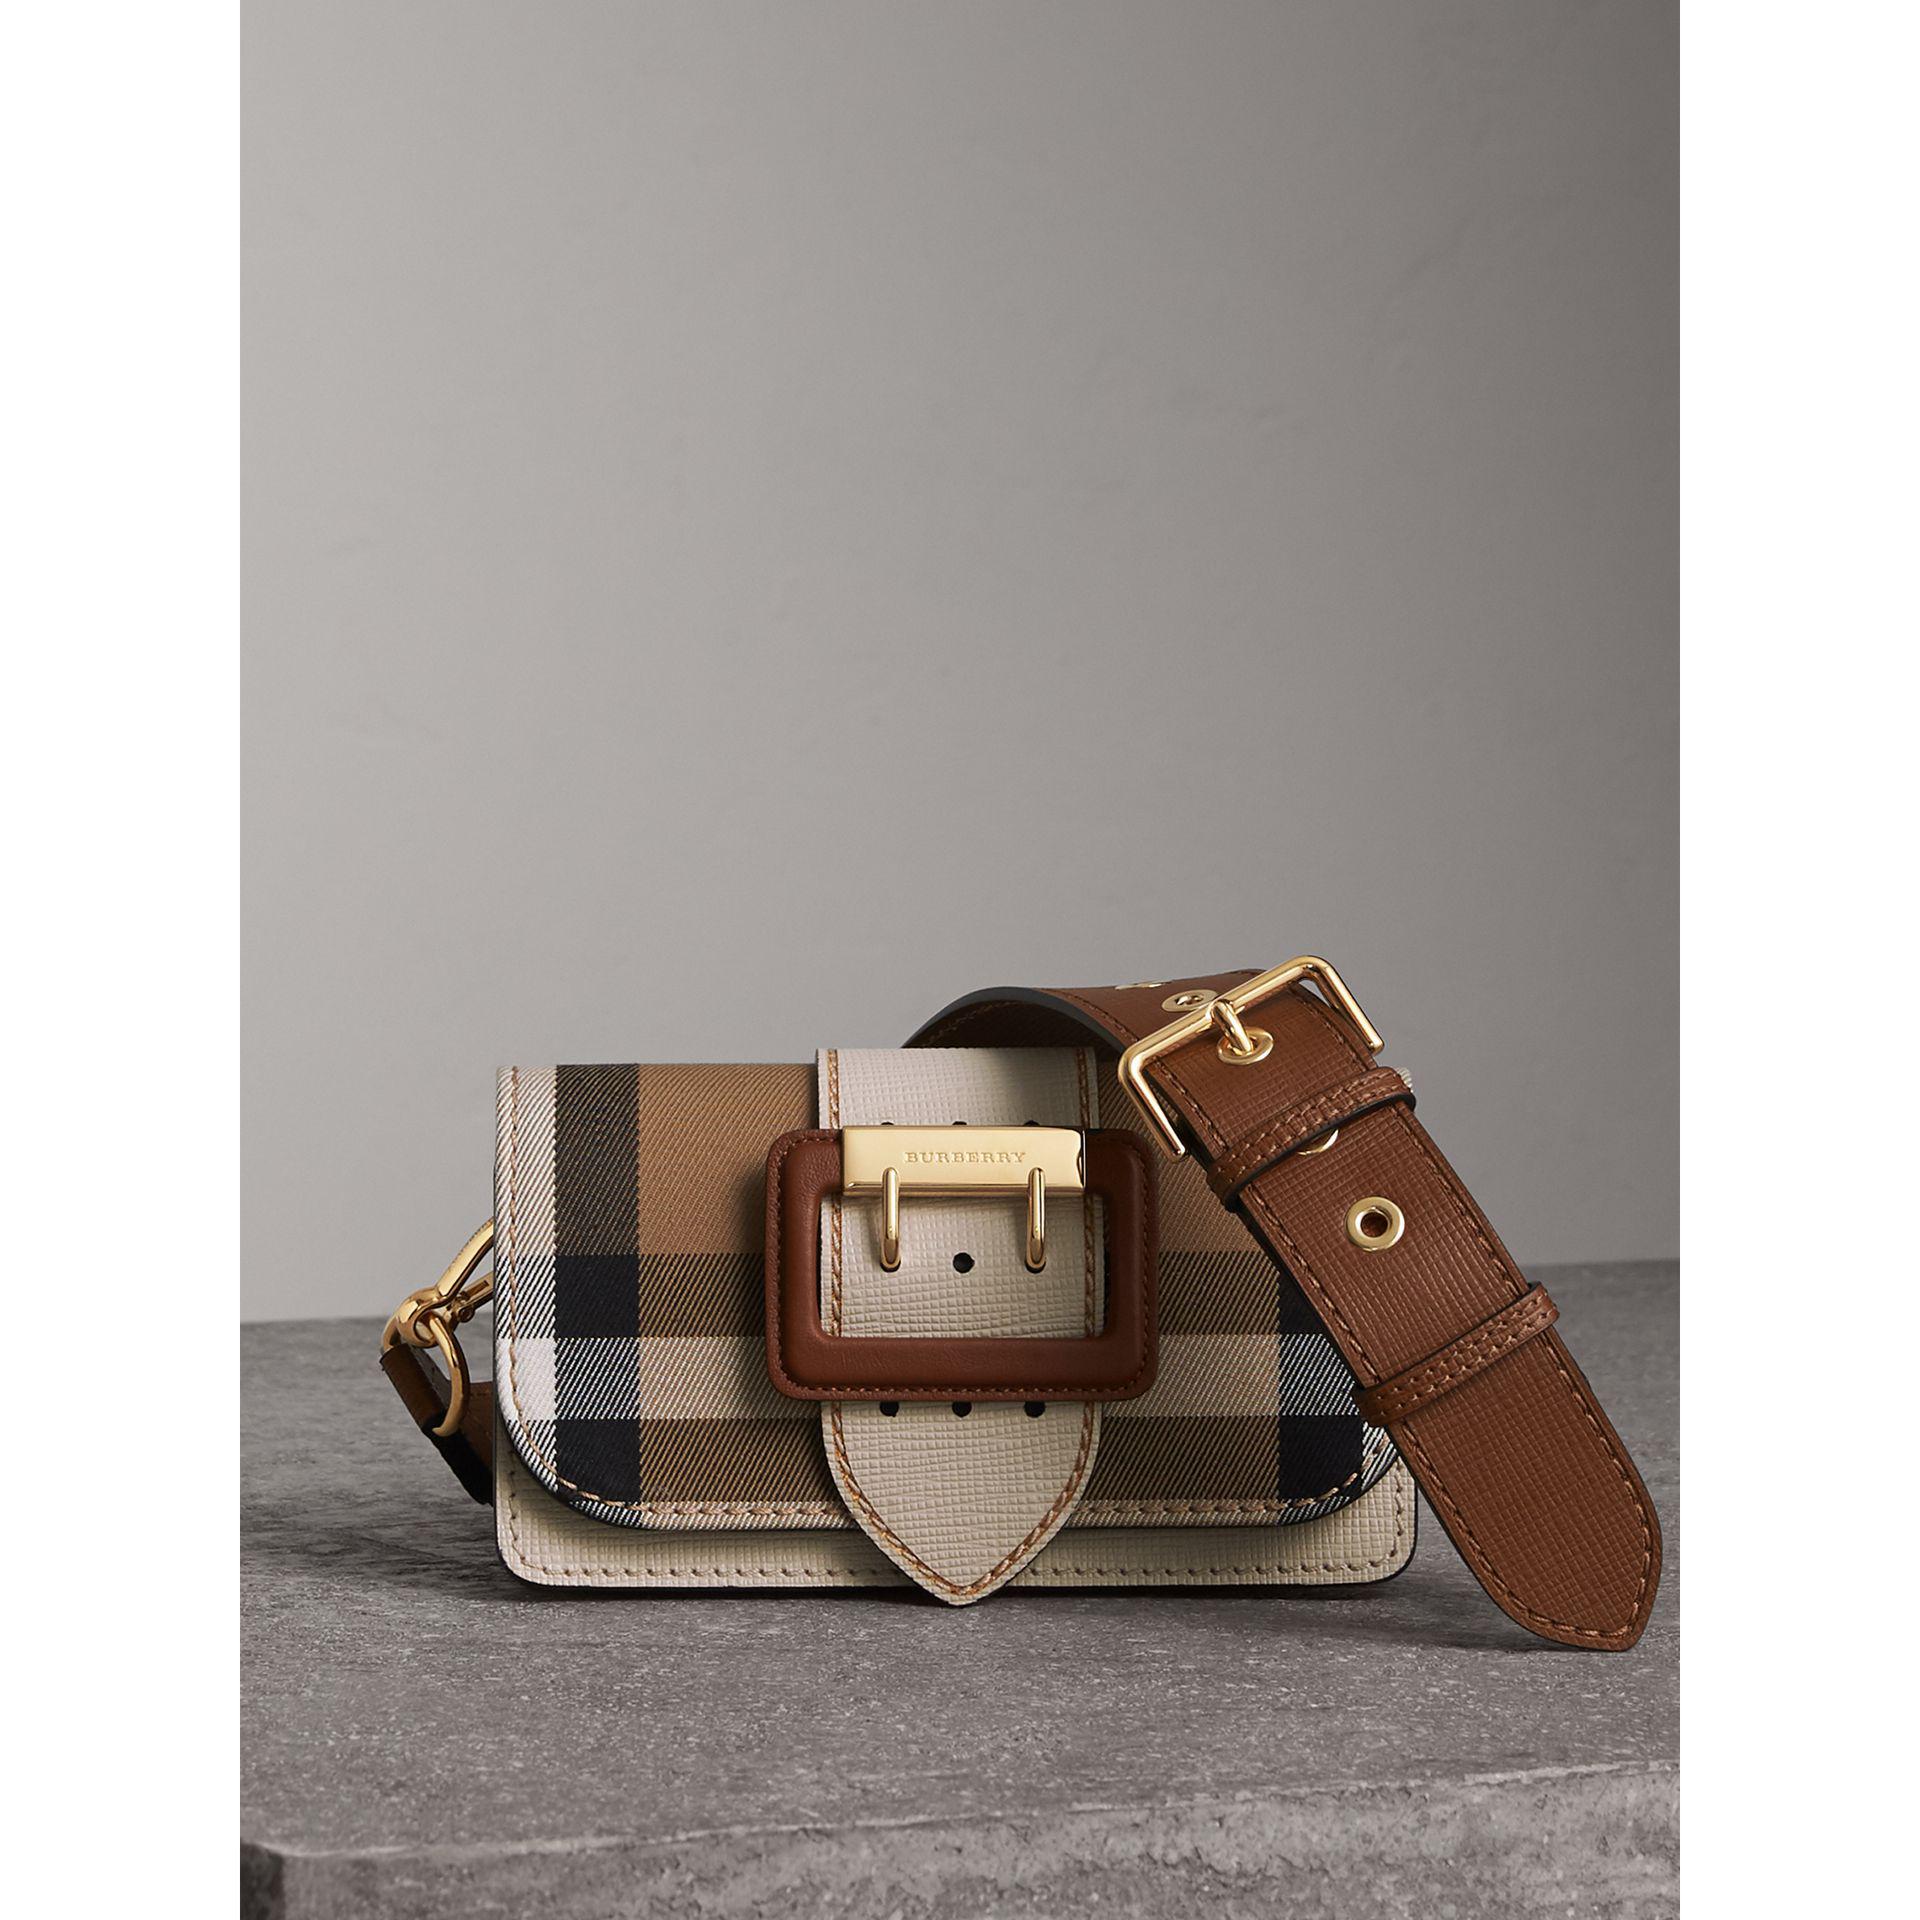 Burberry The Small Buckle Bag In House Check And Leather